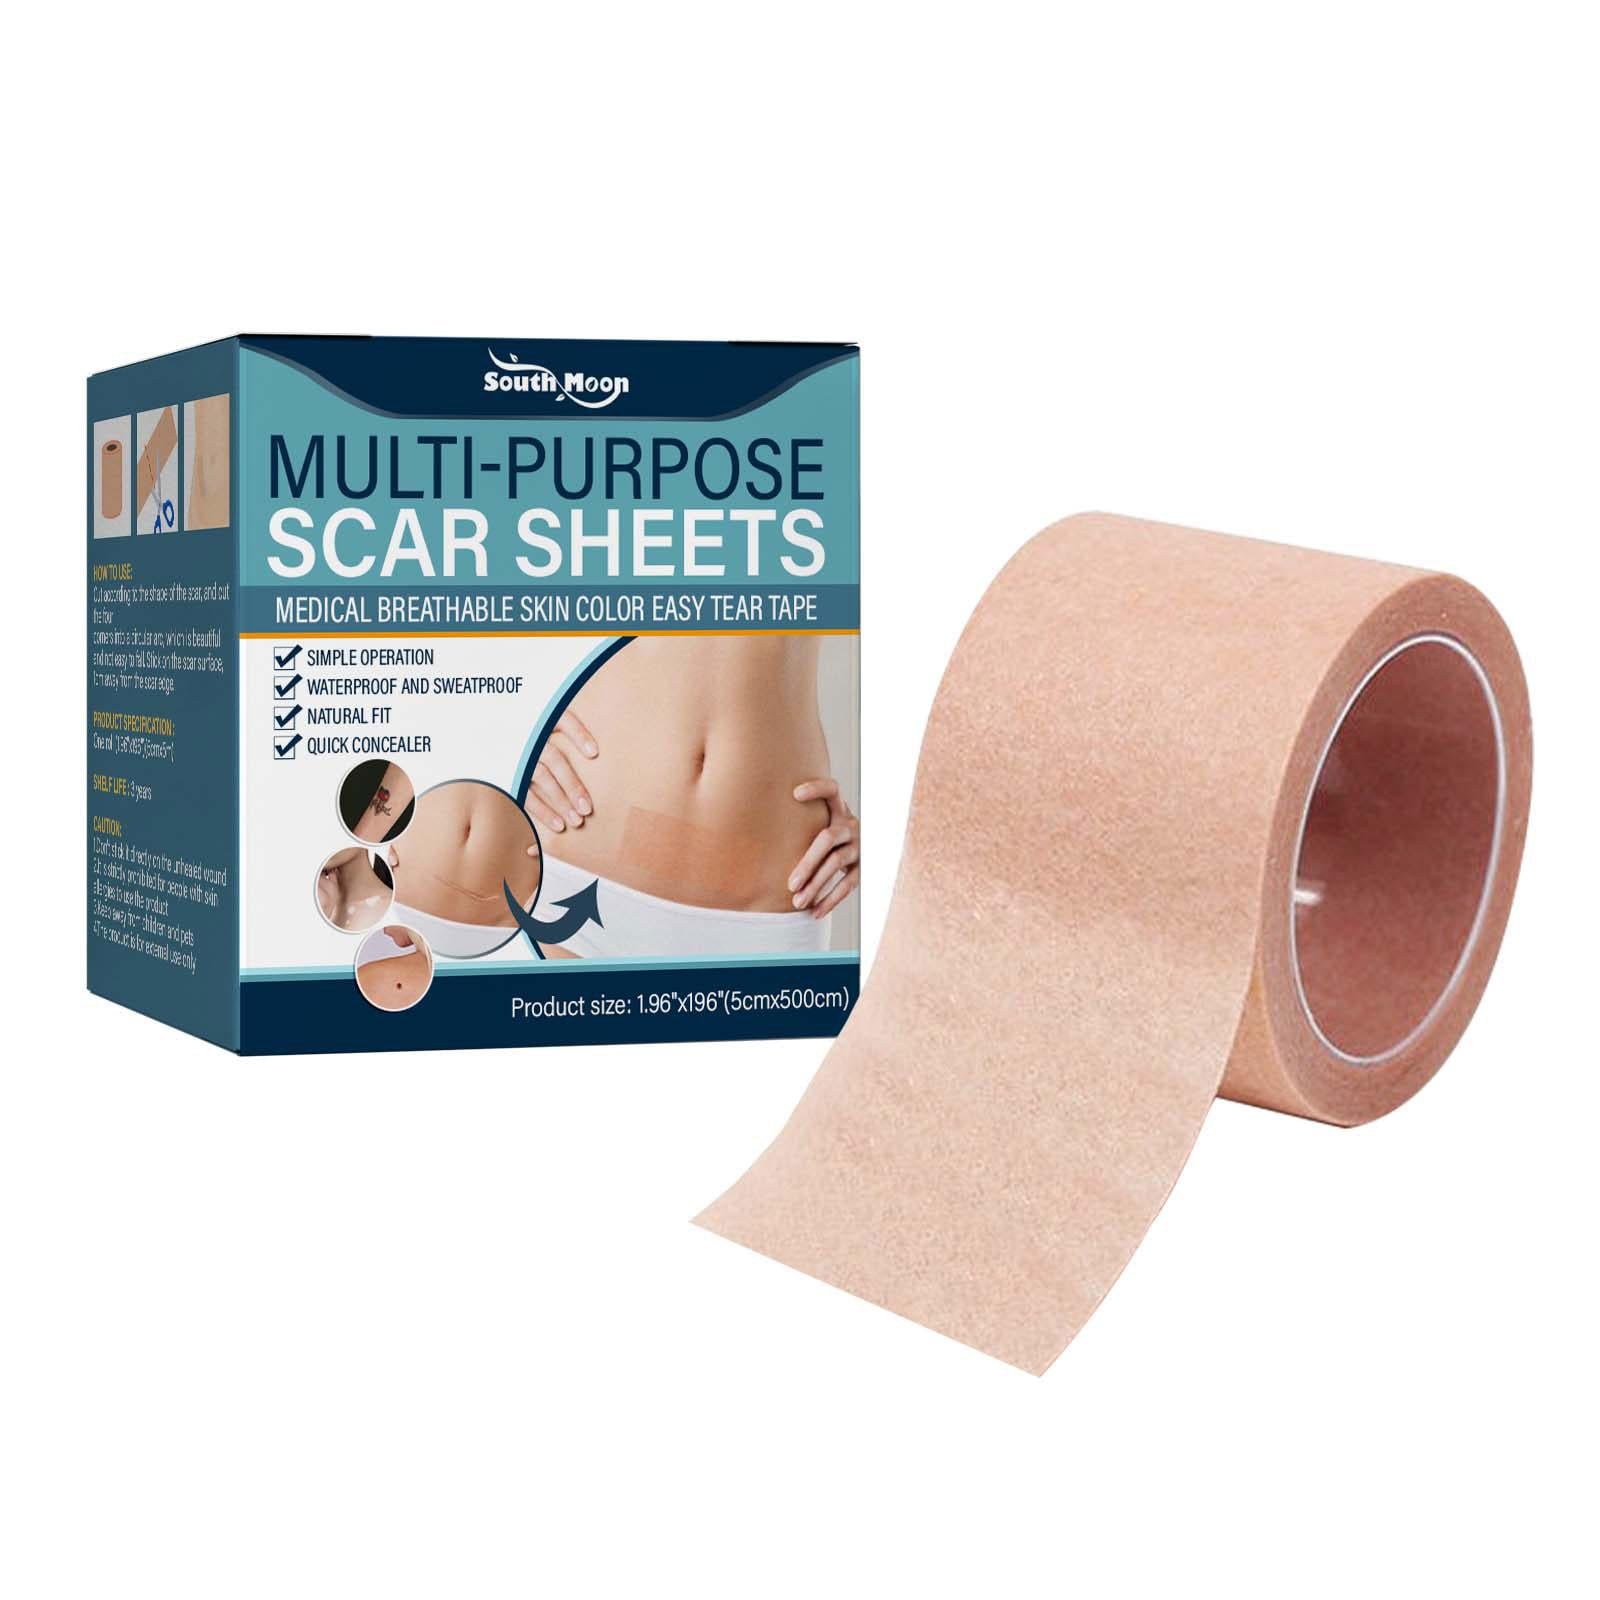 Silicone Scar Tape Roll, 1.6” x 120” Medical Tape for Wound Care Bandages  Scars Strips for Surgical Scars Keloid, C-Section, Burns, Injuries Acne